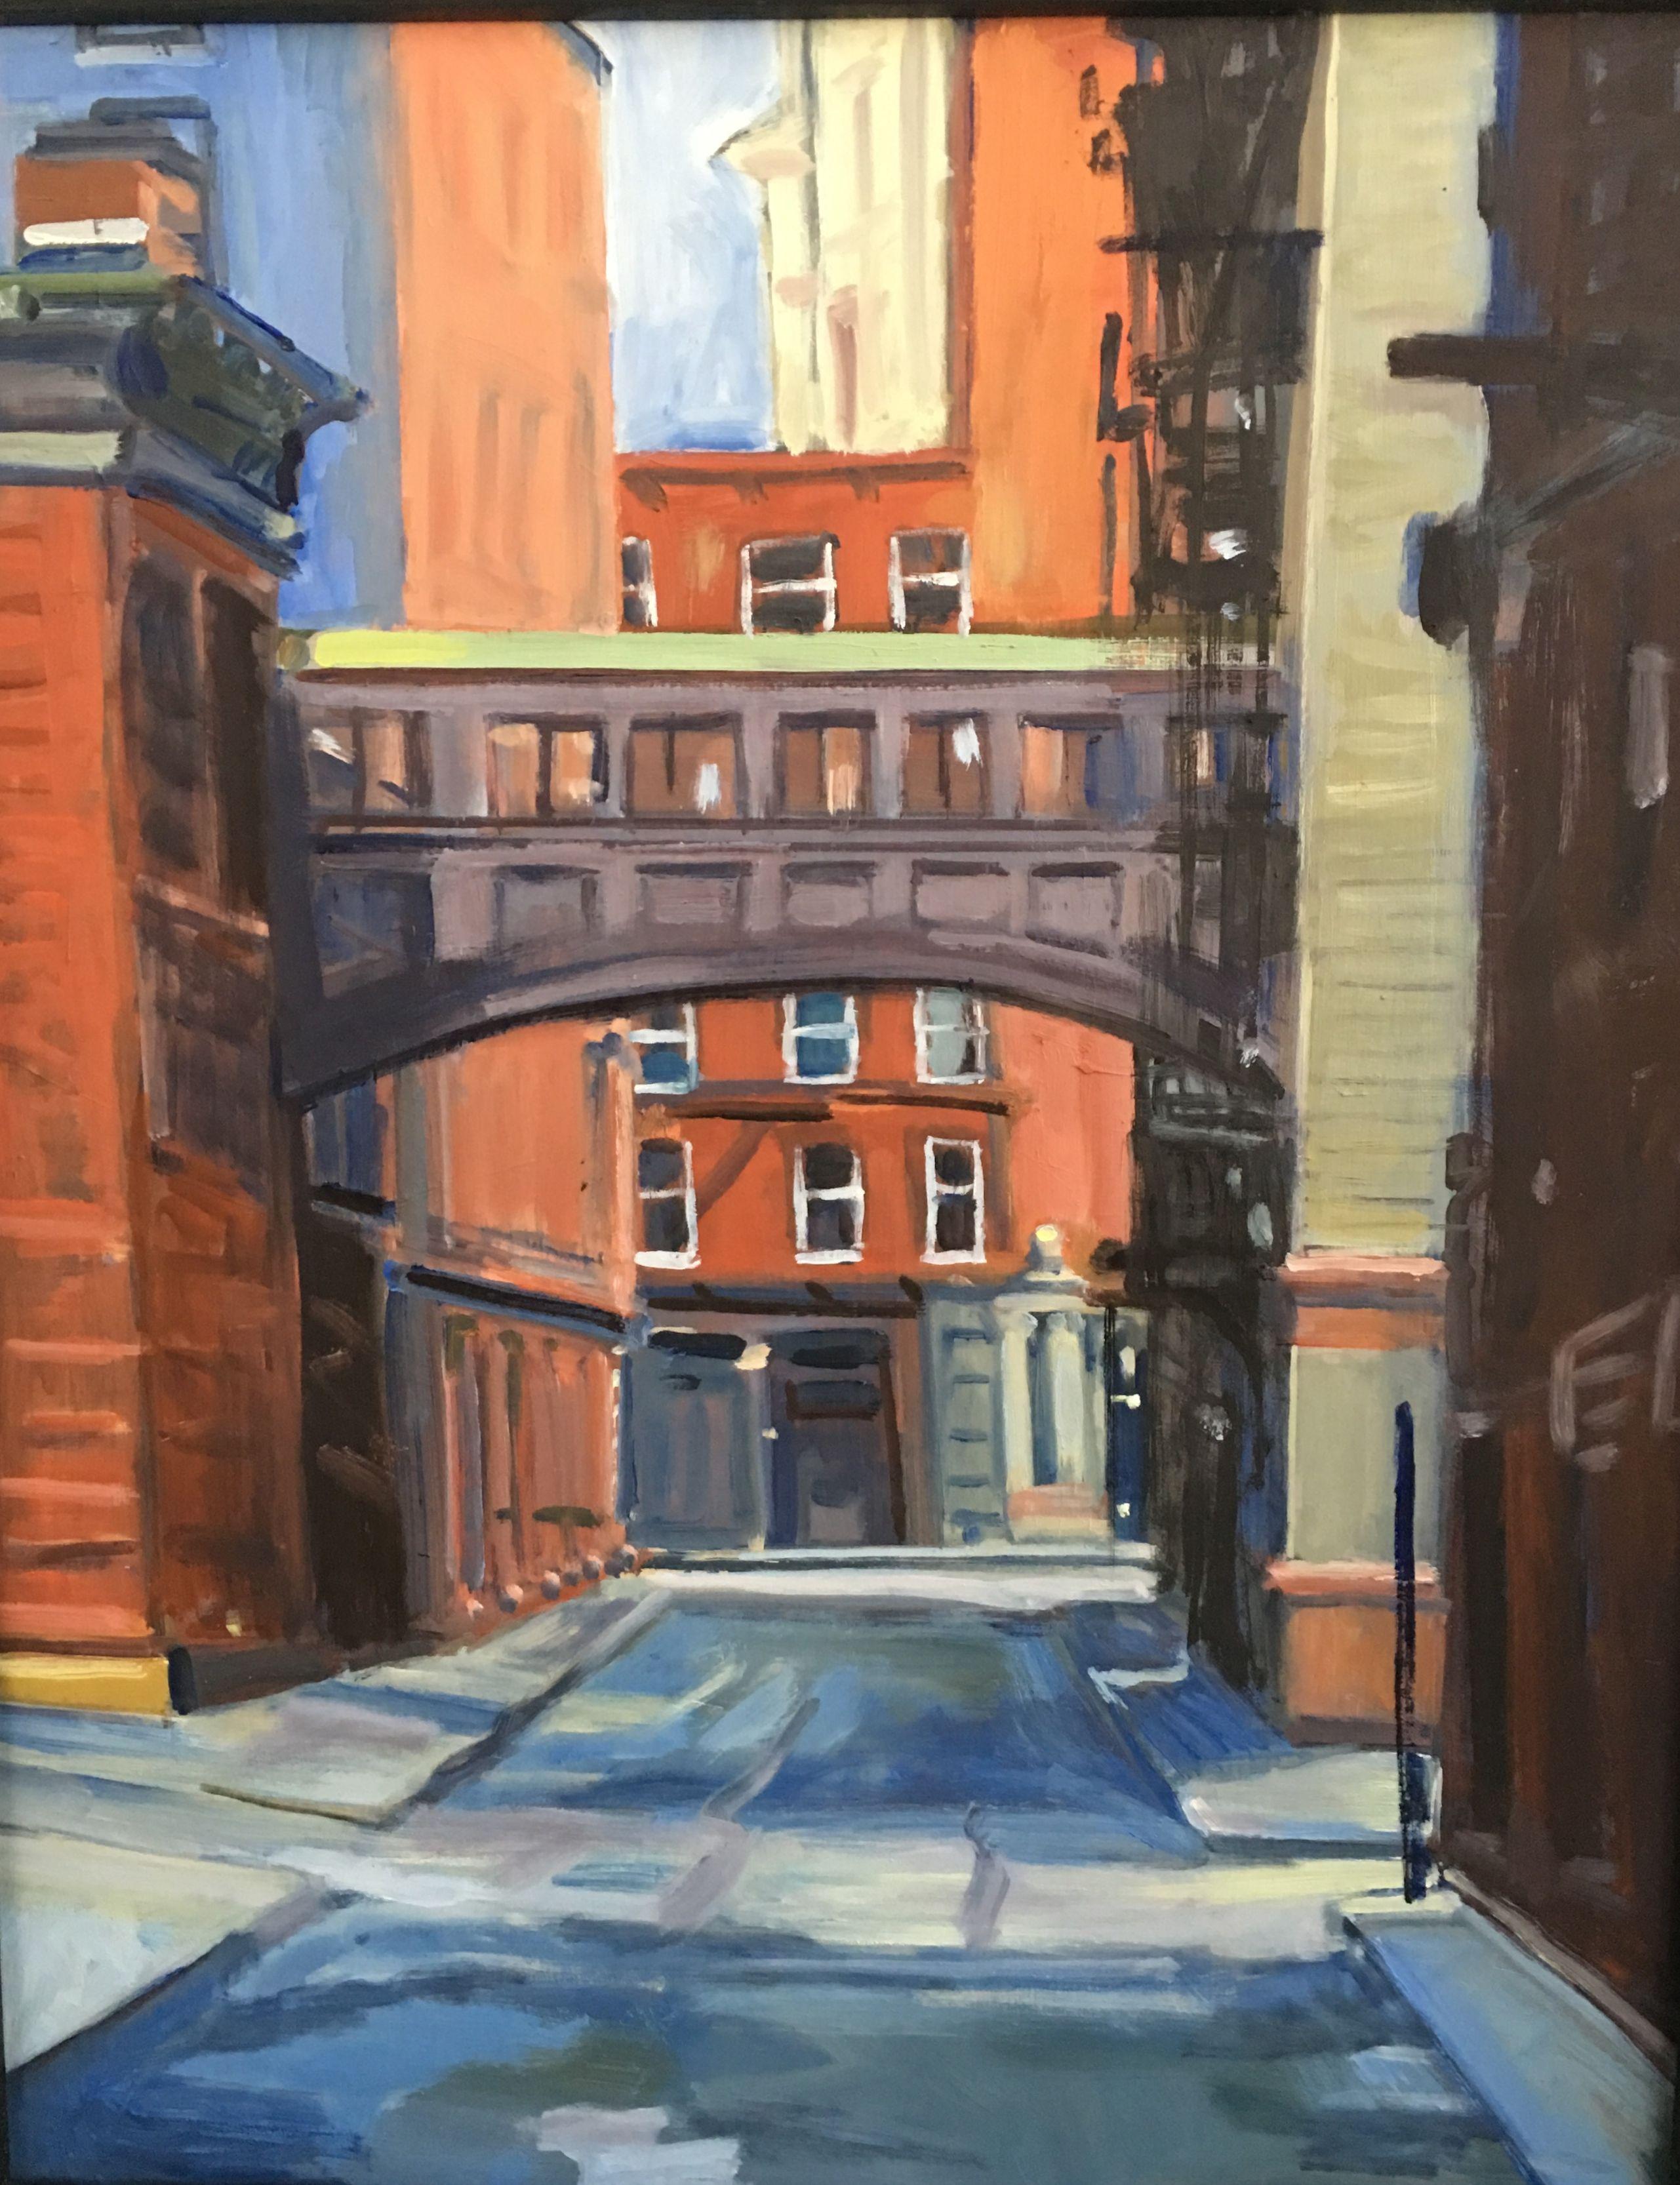 This is a cityscape scene in Tribeca New York City. The painting showcases a historic passage way between two buildings.  :: Painting :: Realism :: This piece comes with an official certificate of authenticity signed by the artist :: Ready to Hang: